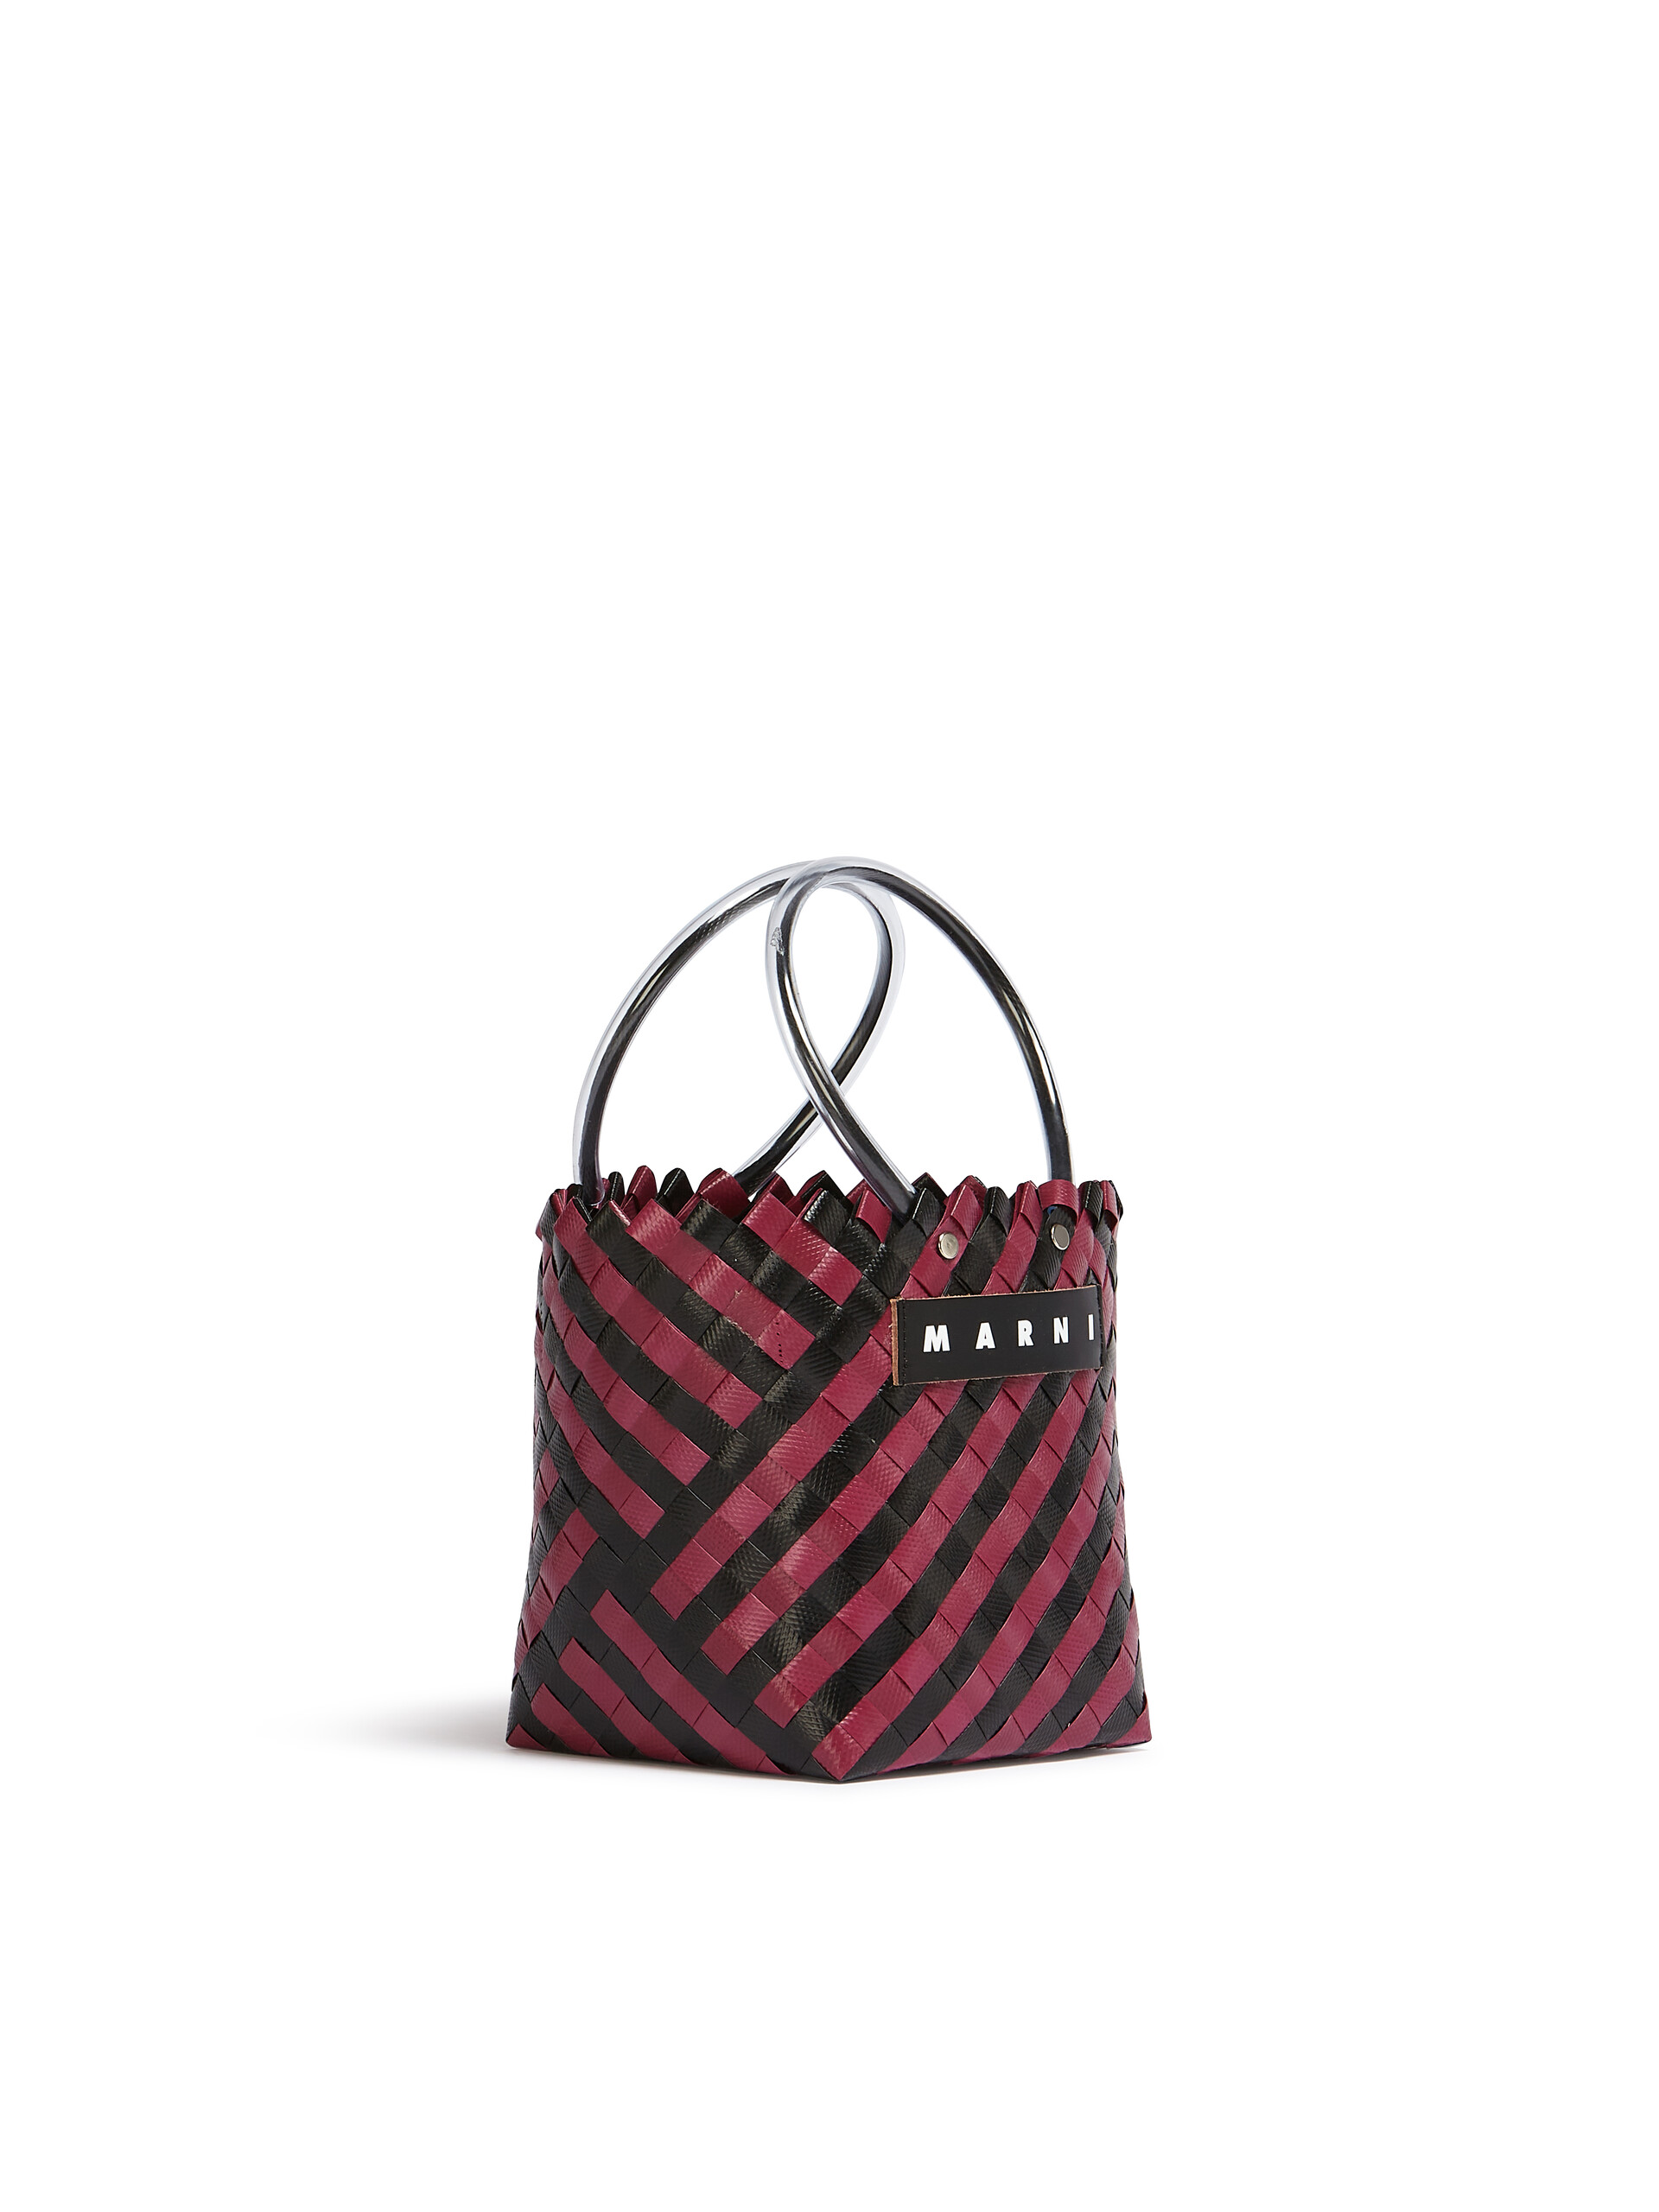 MARNI MARKET bag in black and burgundy woven material - Bags - Image 2